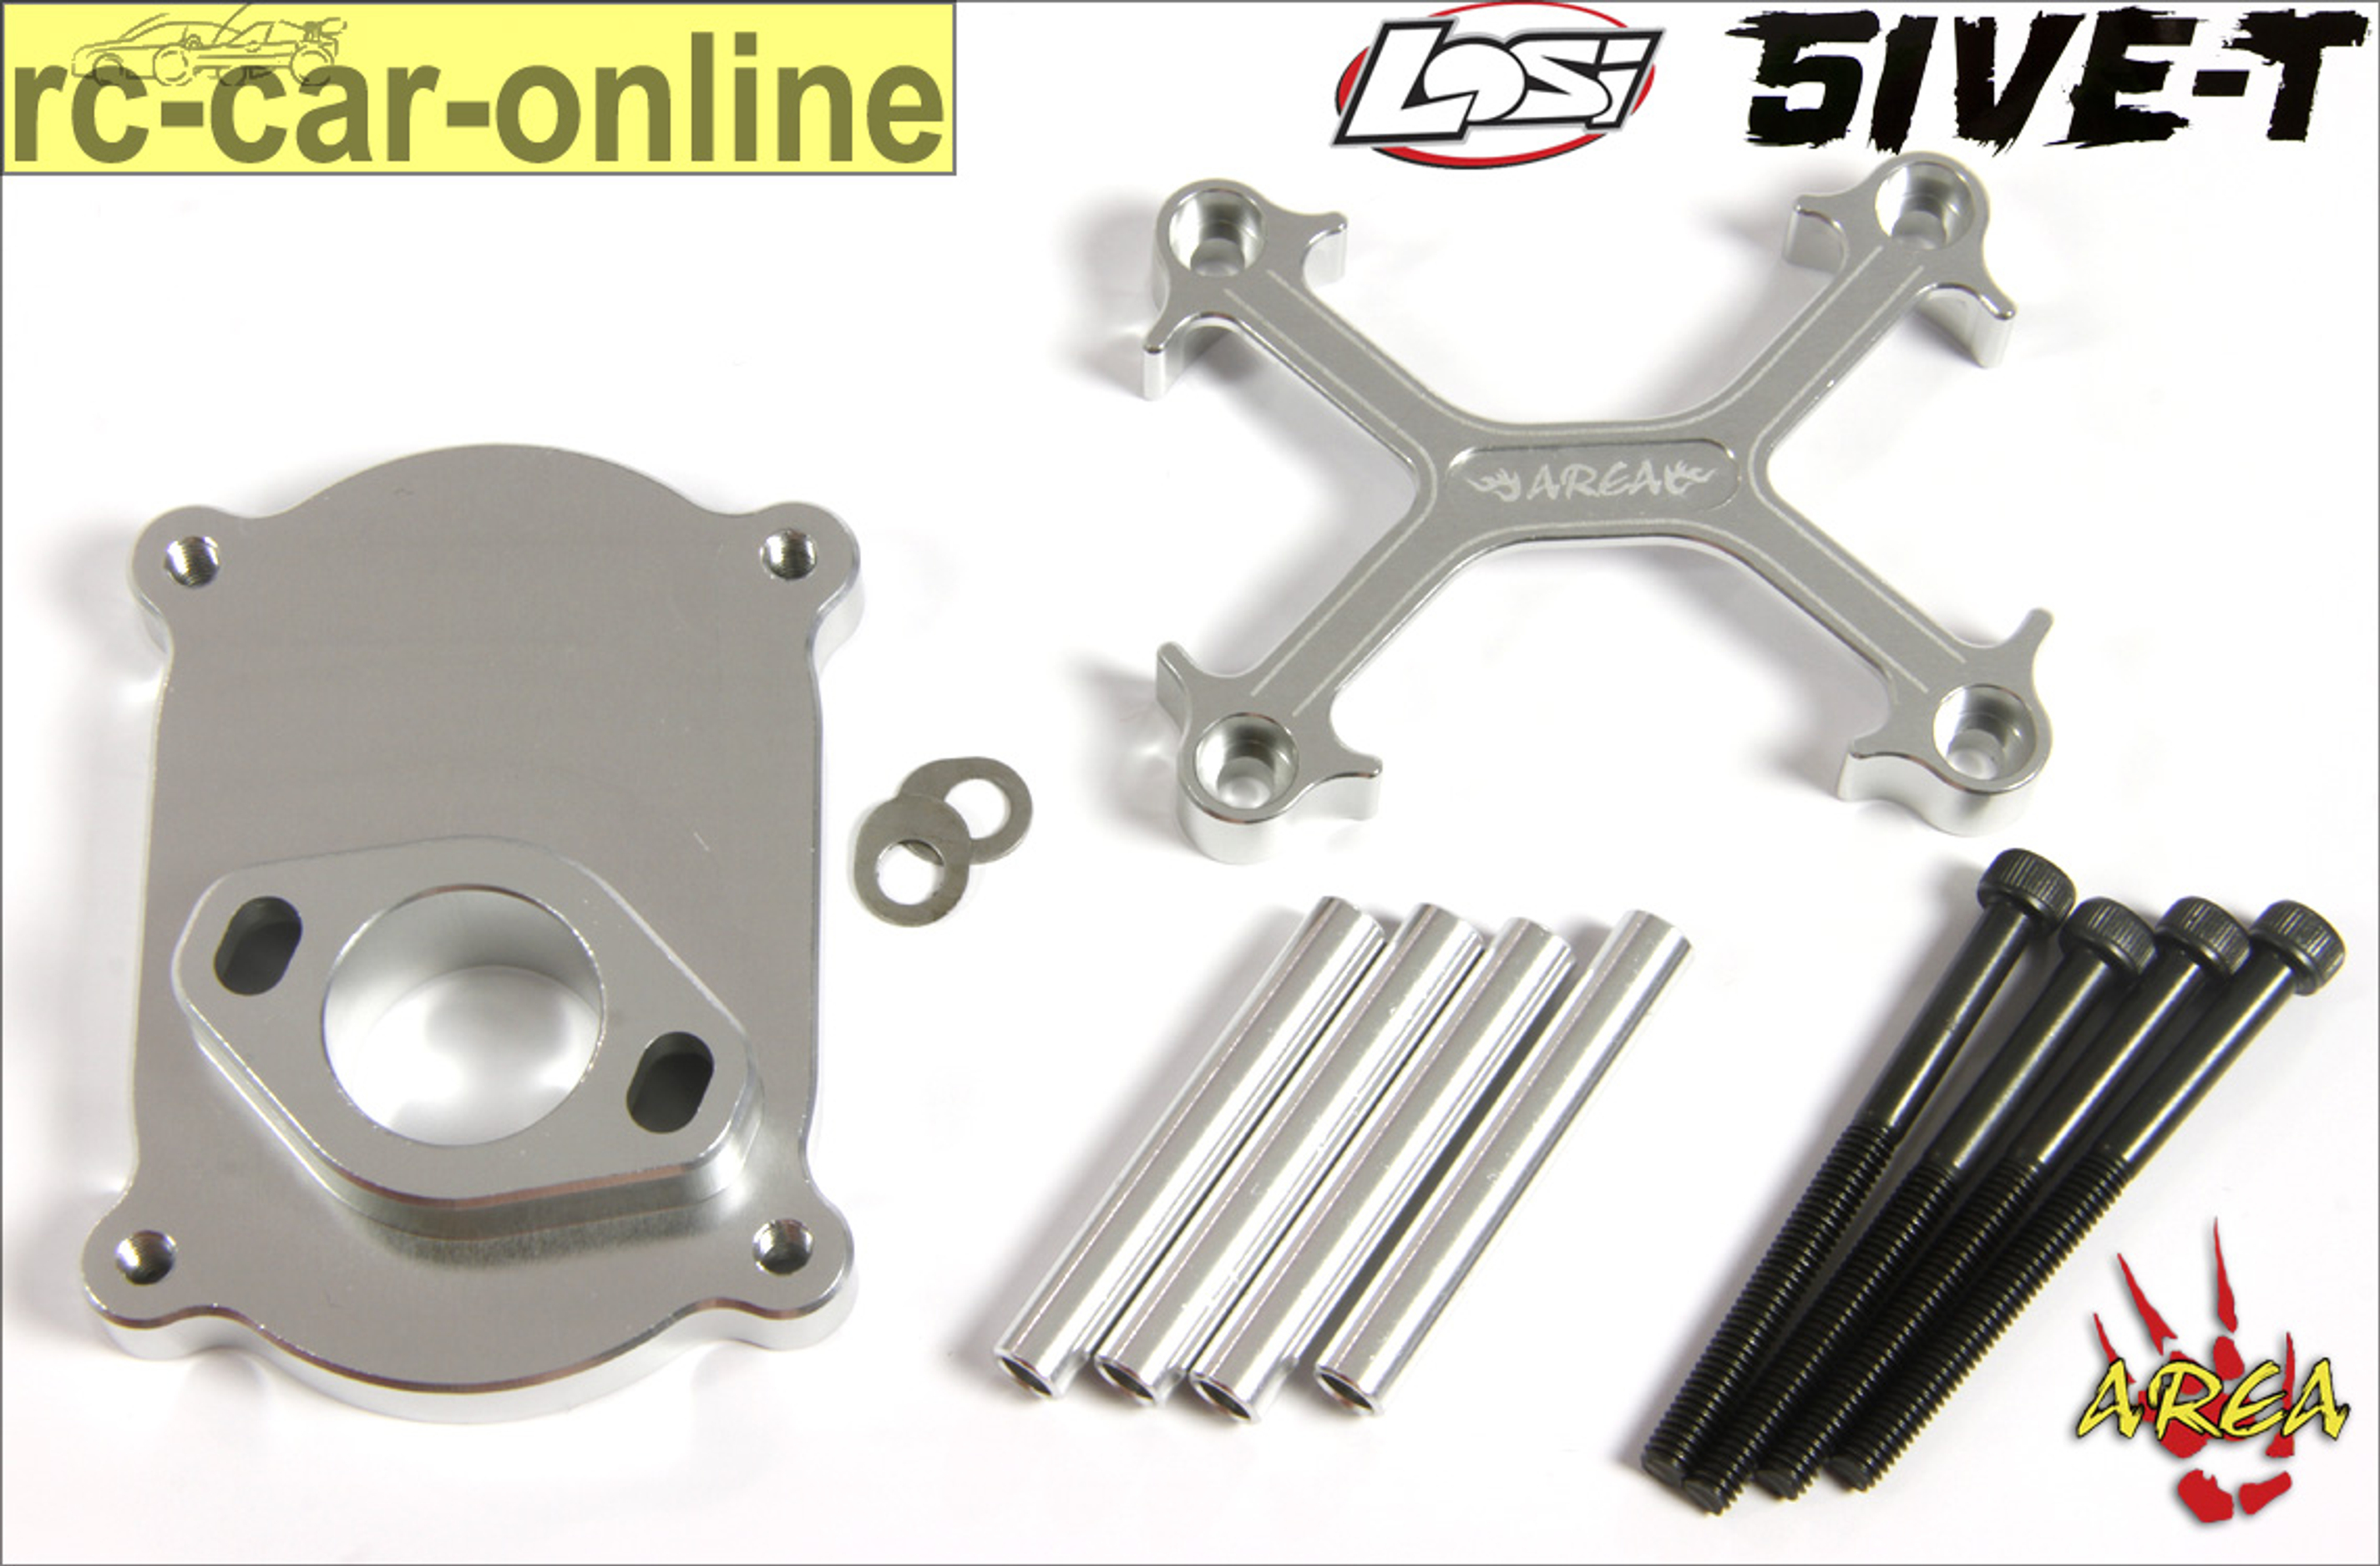 AREA-5T-028 Air filter system Losi 5ive-T and Mini, filter element not included